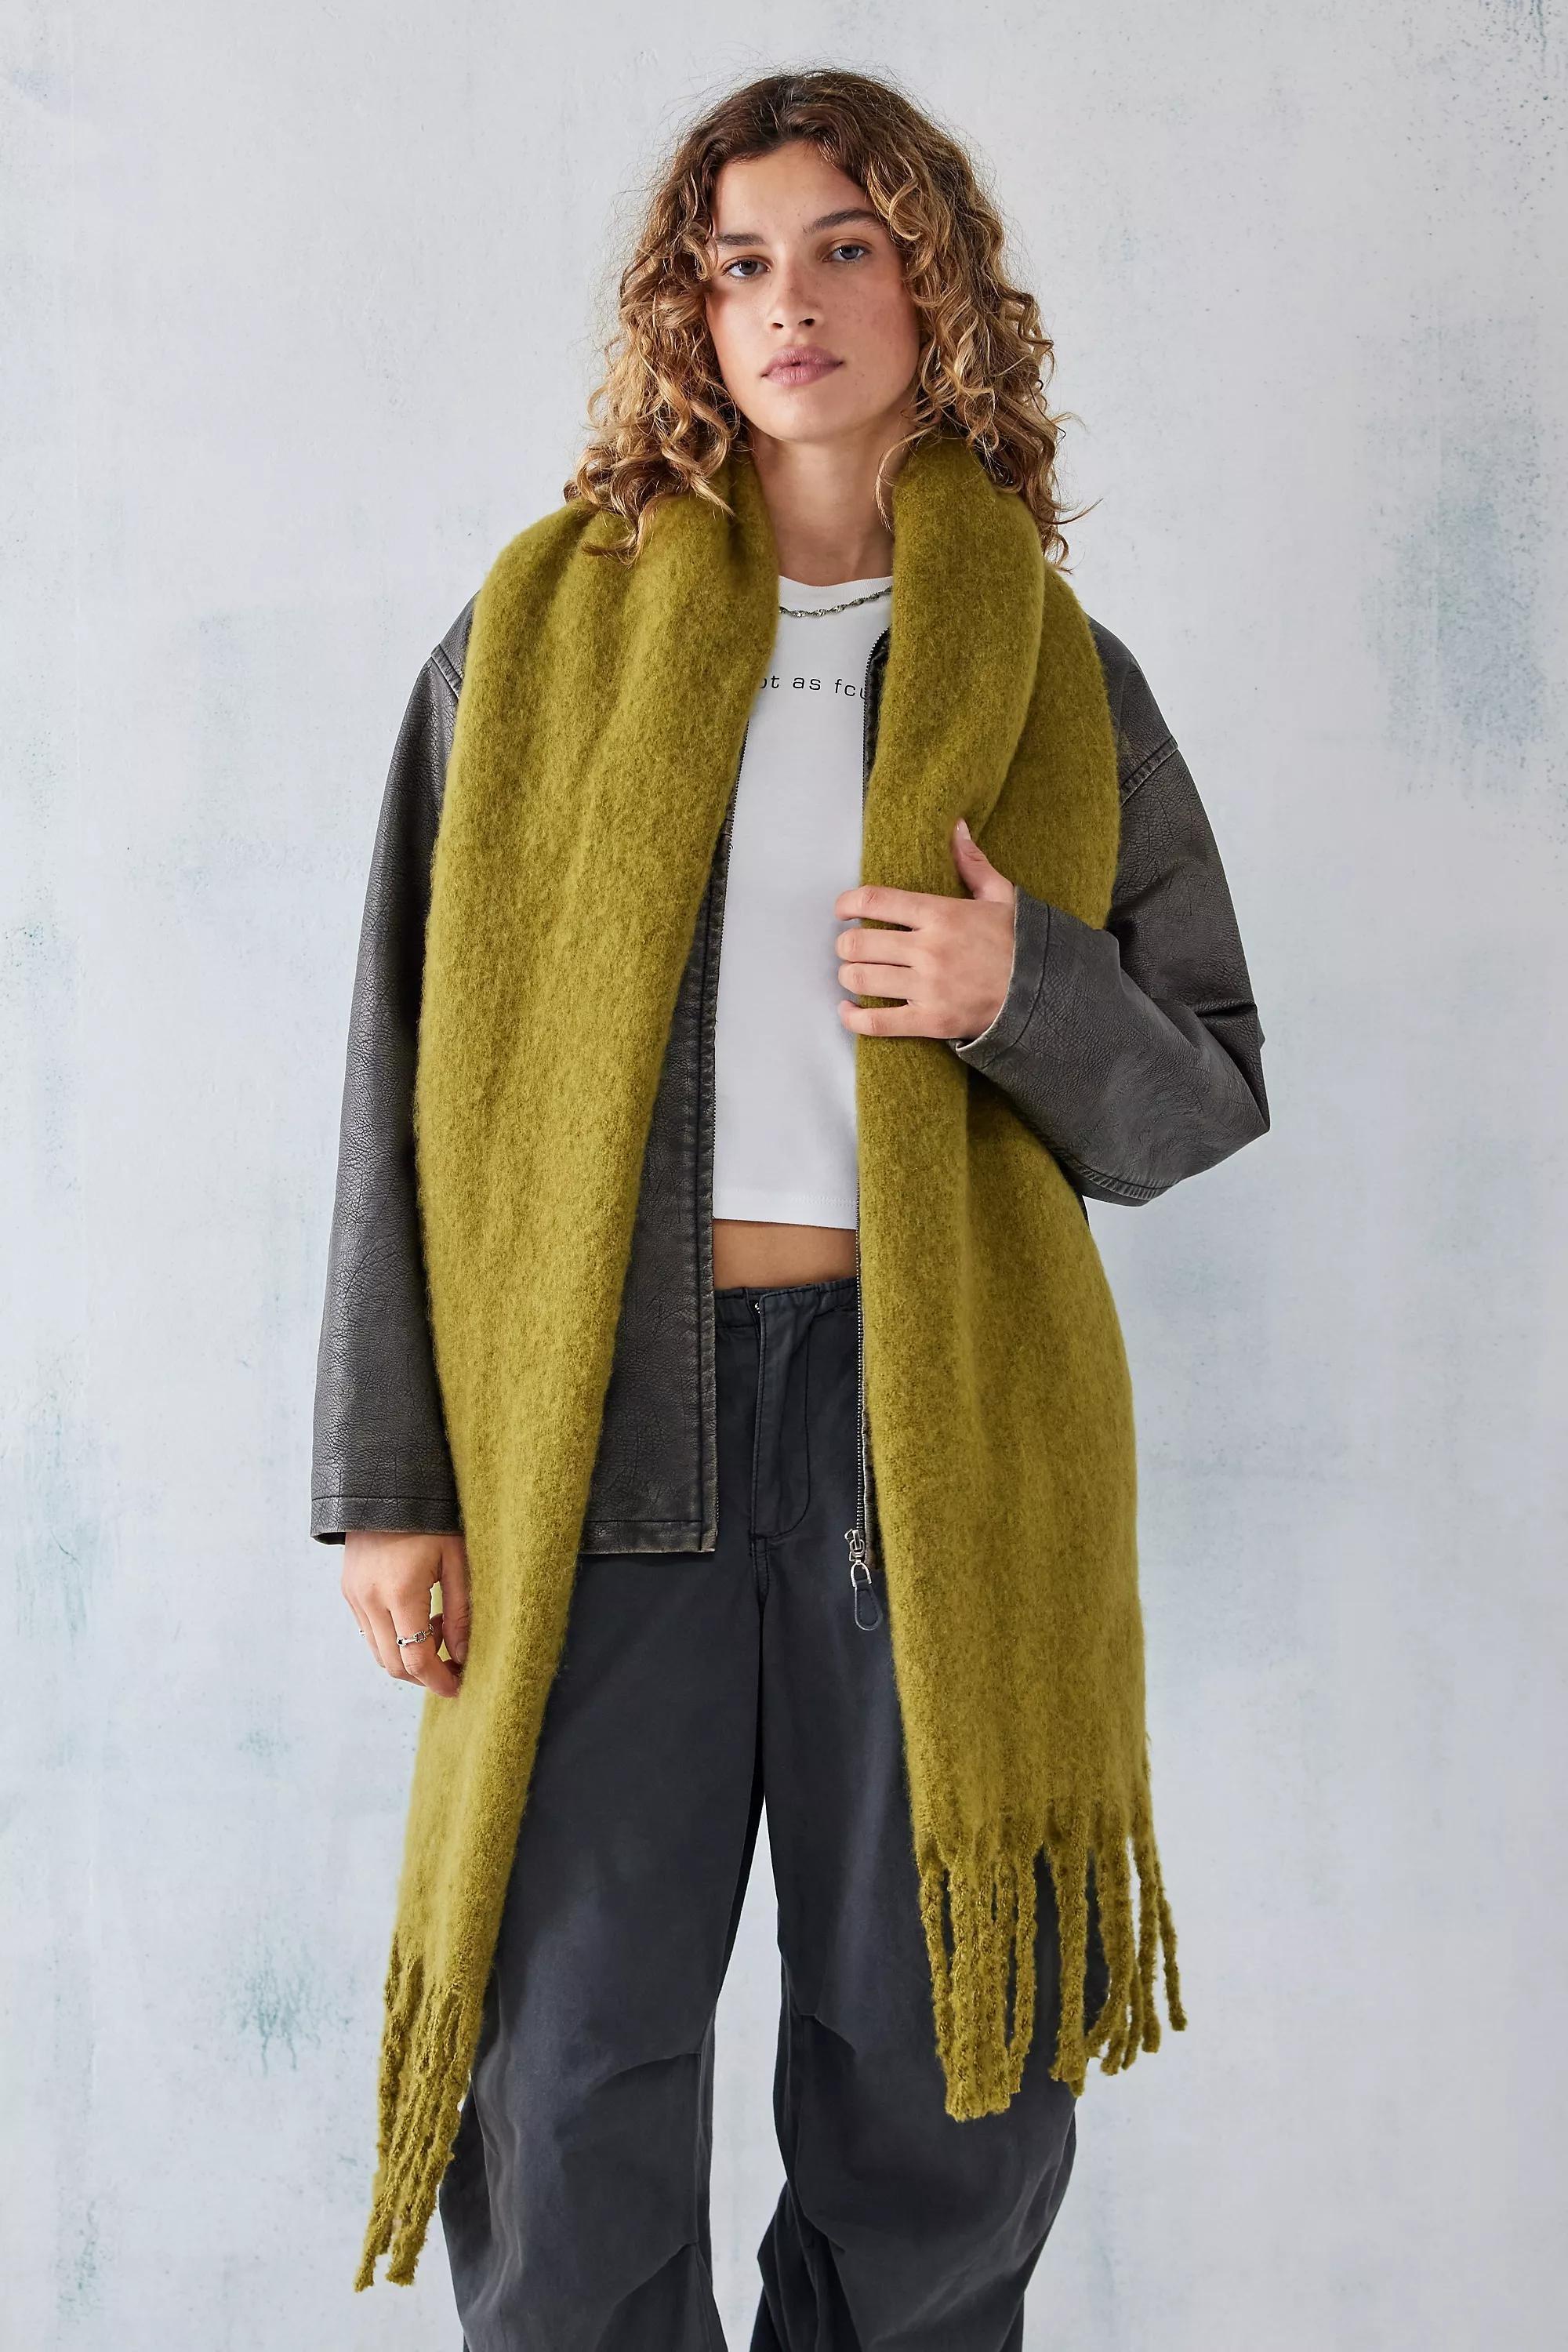 Urban Outfitters - Green Blanket Scarf